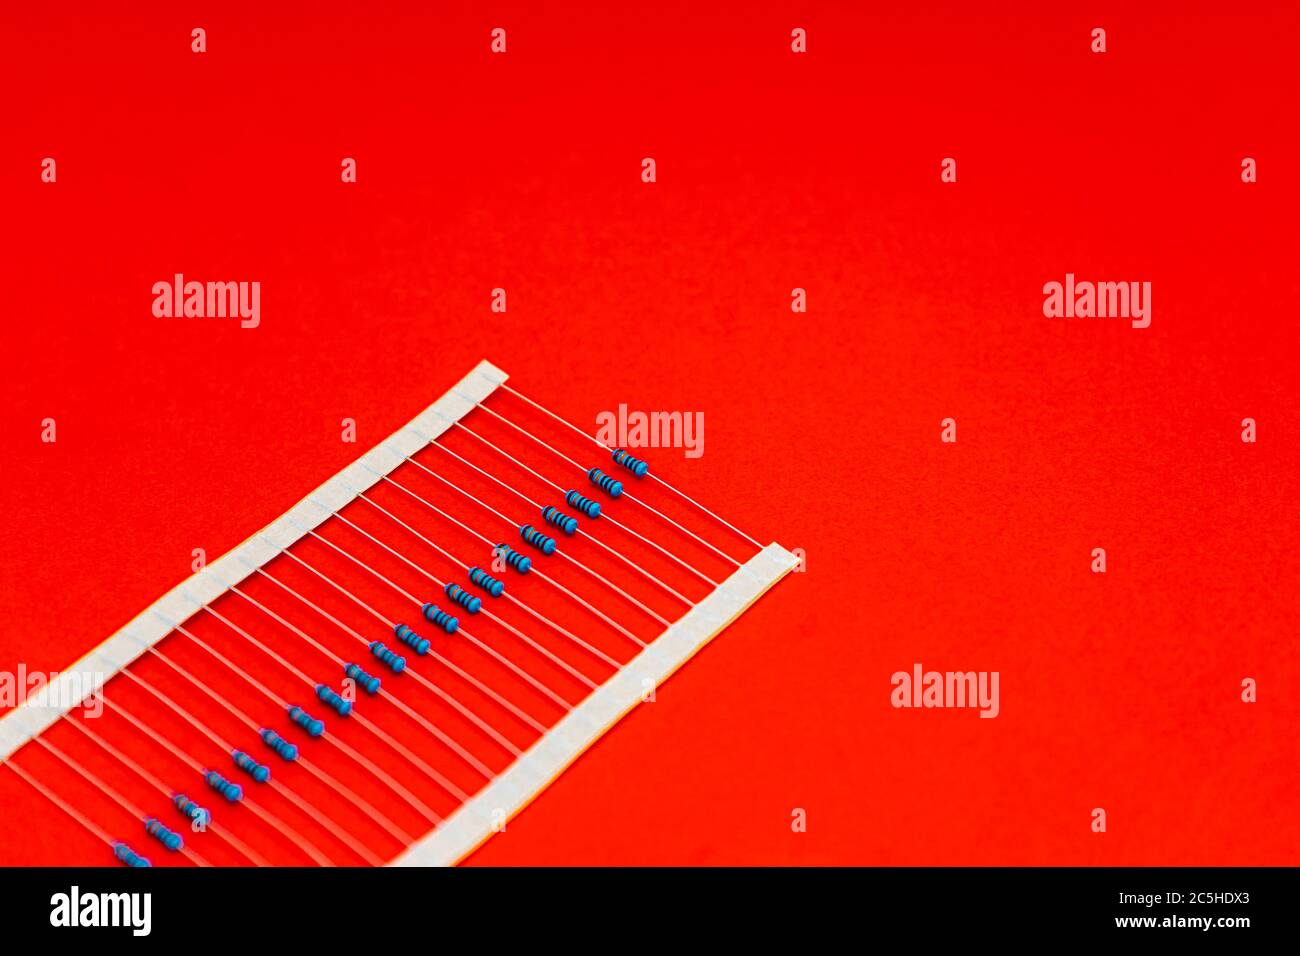 Electronic components for projects, resistors pack over red background Stock Photo